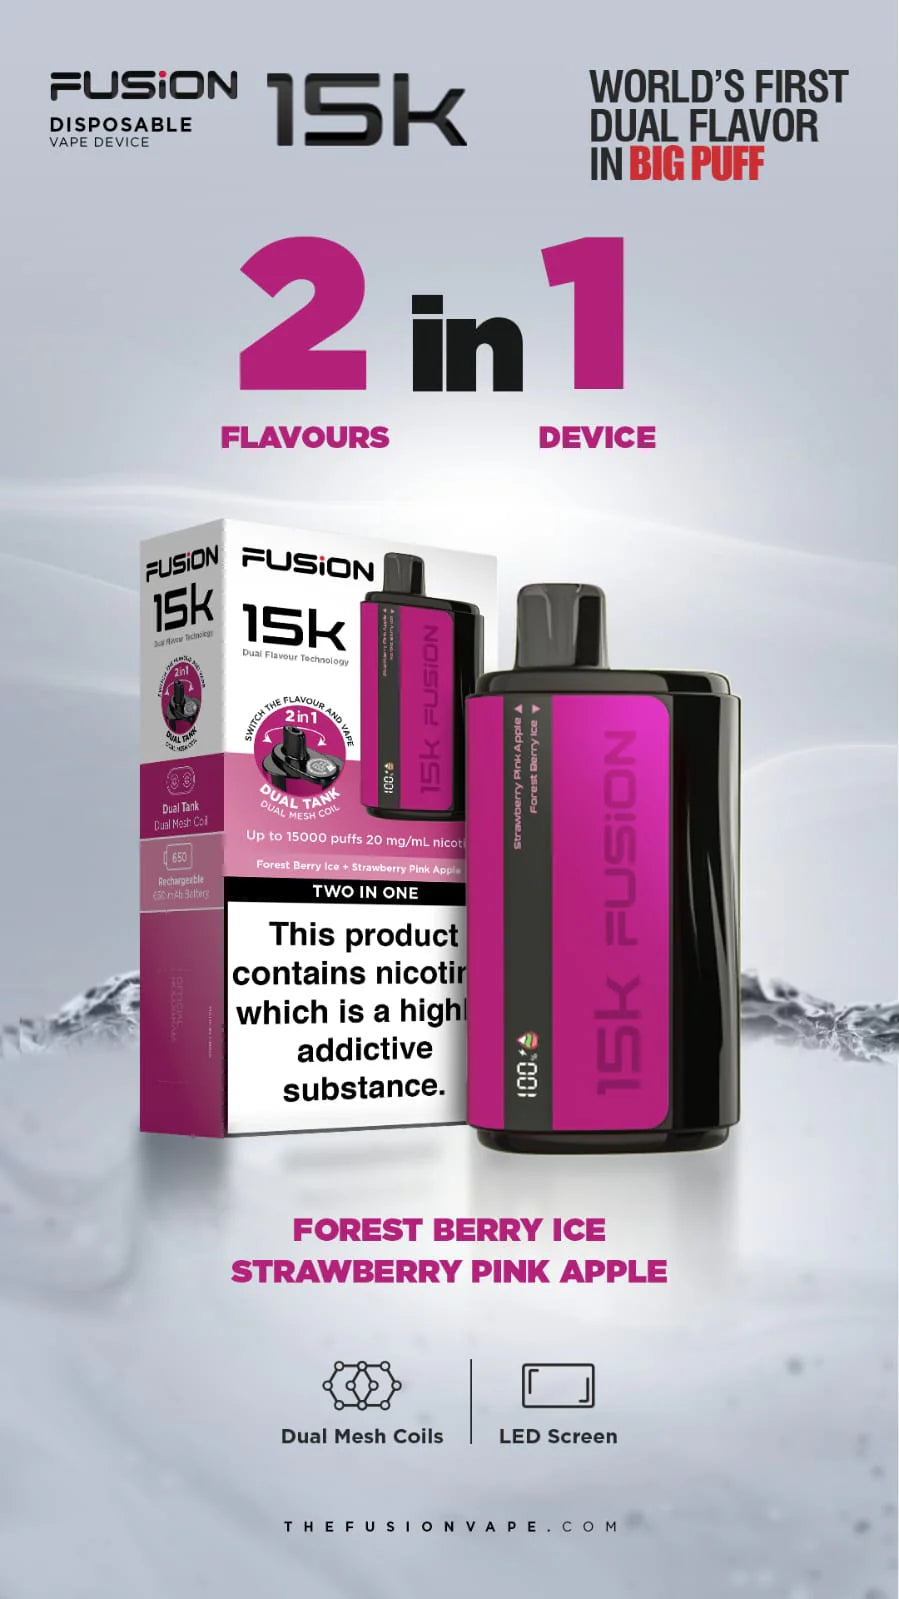 Forest_Berry_Ice_Strawberry_Pink_Apple fusion 15k